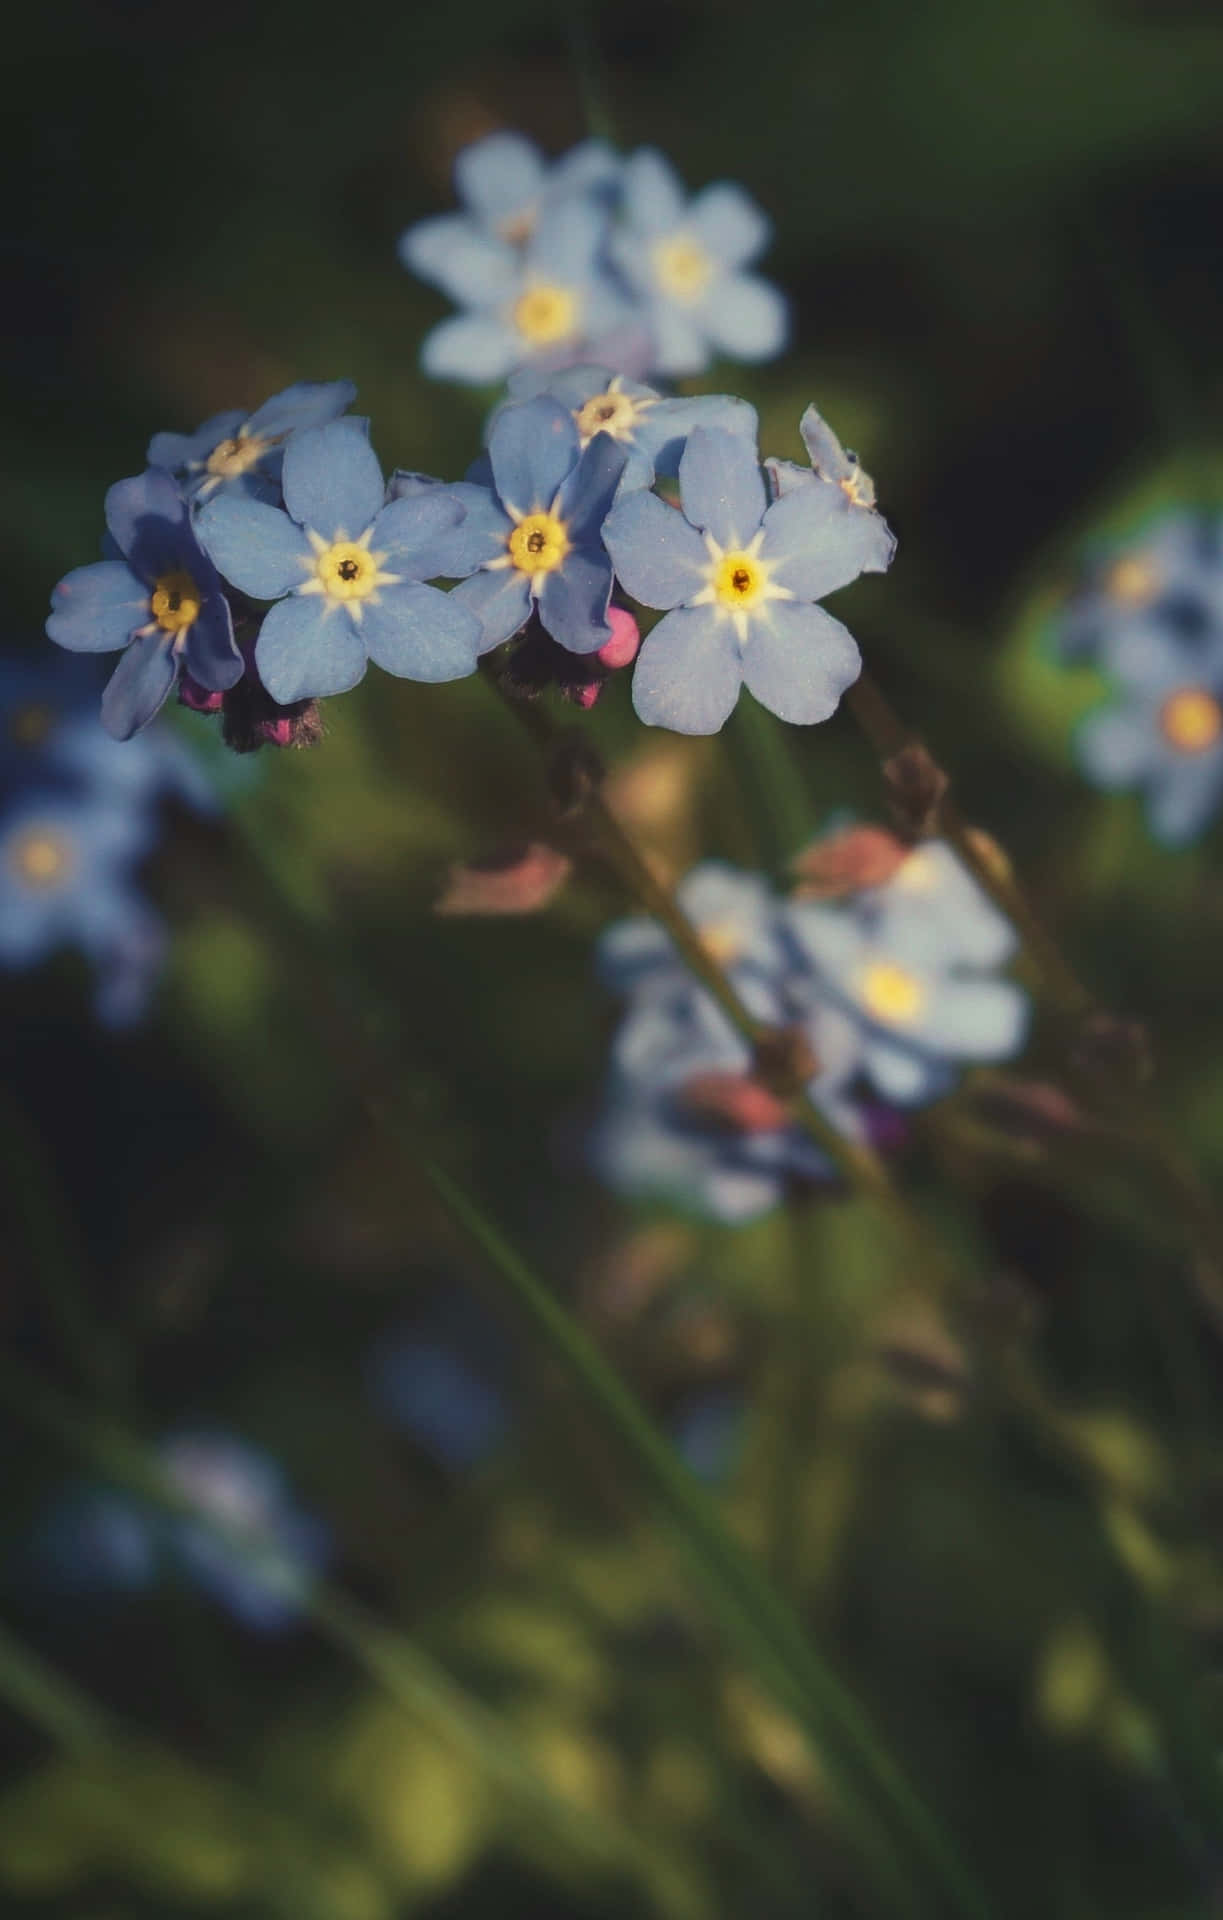 Blurry Forget-Me-Nots Blue Flowers Phone Wallpaper